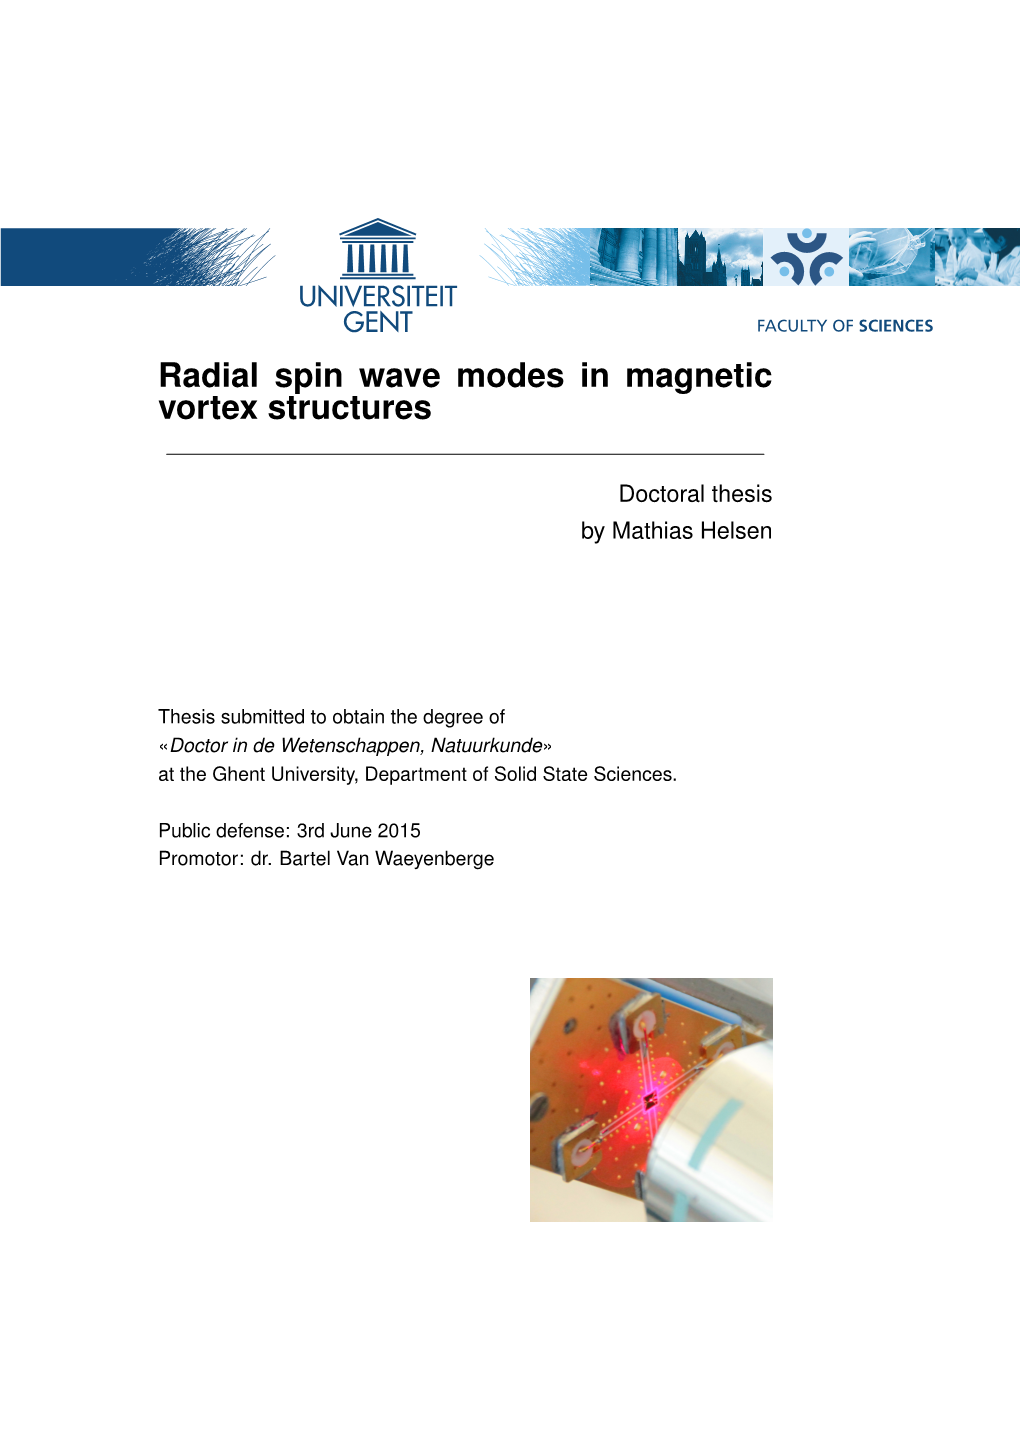 Radial Spin Wave Modes in Magnetic Vortex Structures